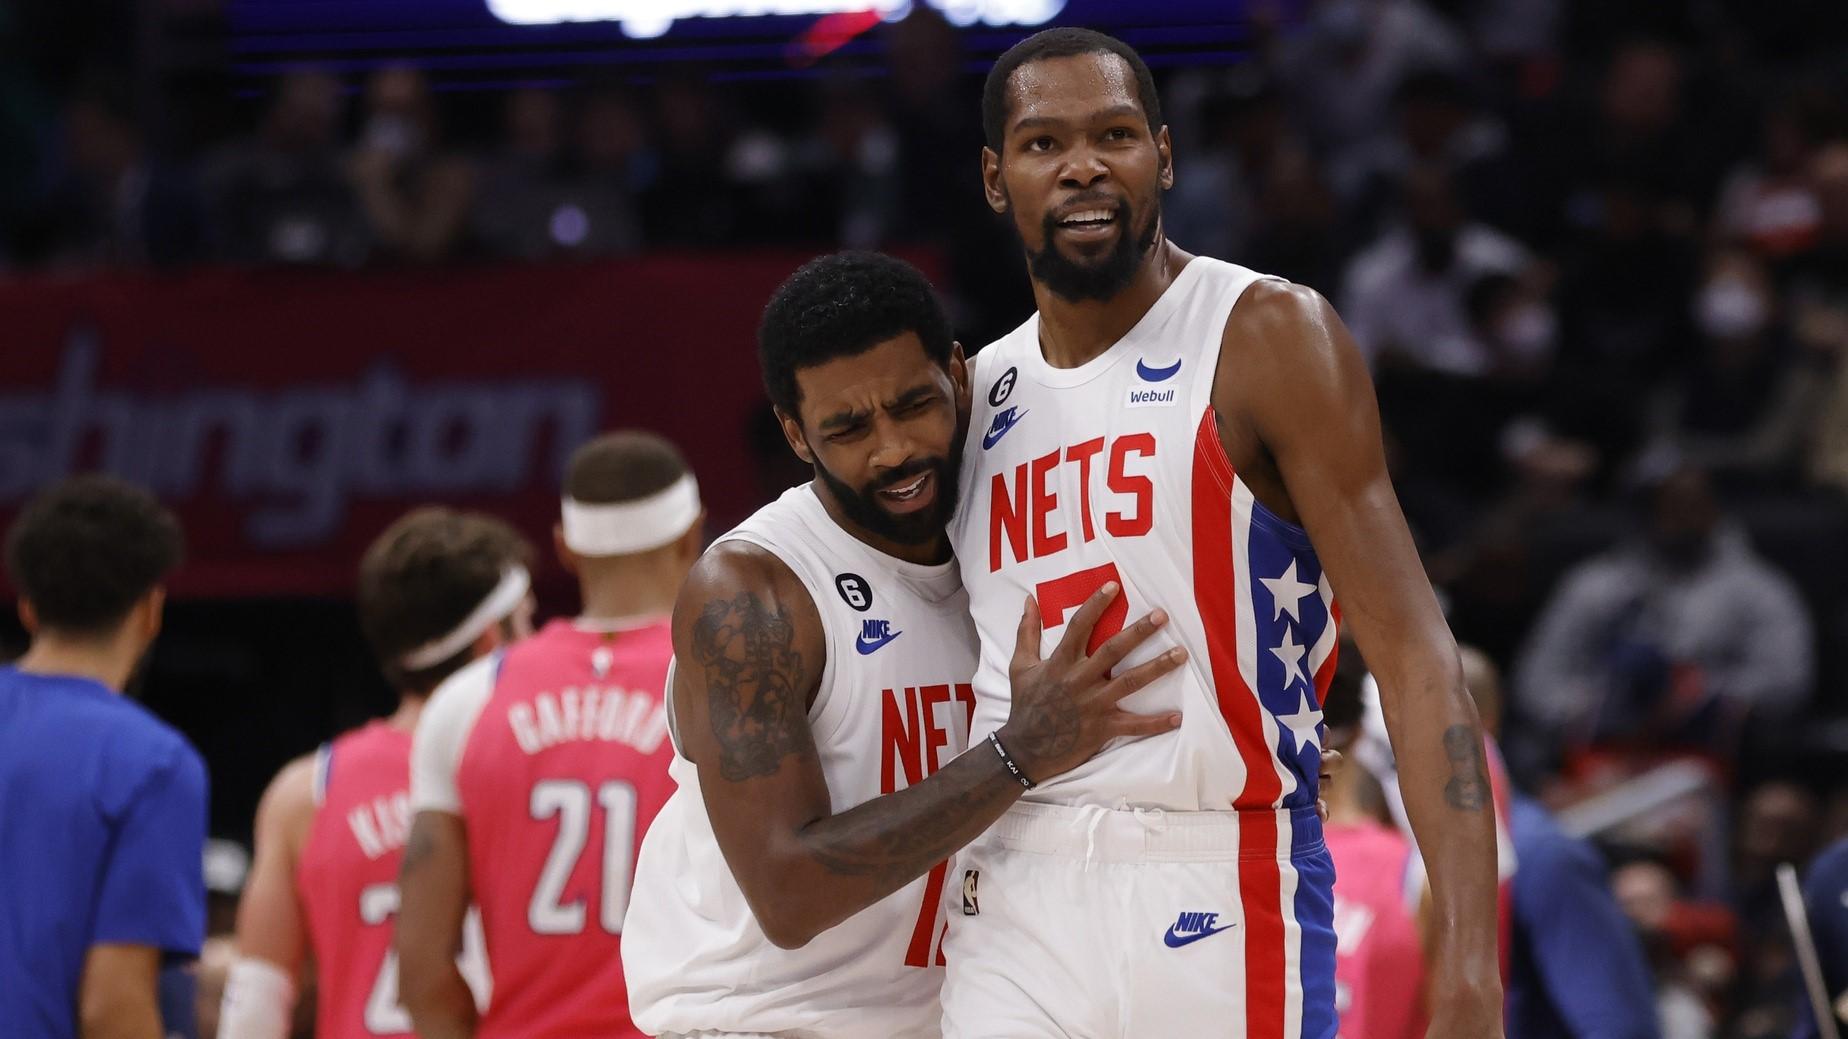 Dec 12, 2022; Washington, District of Columbia, USA; Brooklyn Nets guard Kyrie Irving (11) celebrates with Nets forward Kevin Durant (7) against the Washington Wizards in the fourth quarter at Capital One Arena. / Geoff Burke-USA TODAY Sports